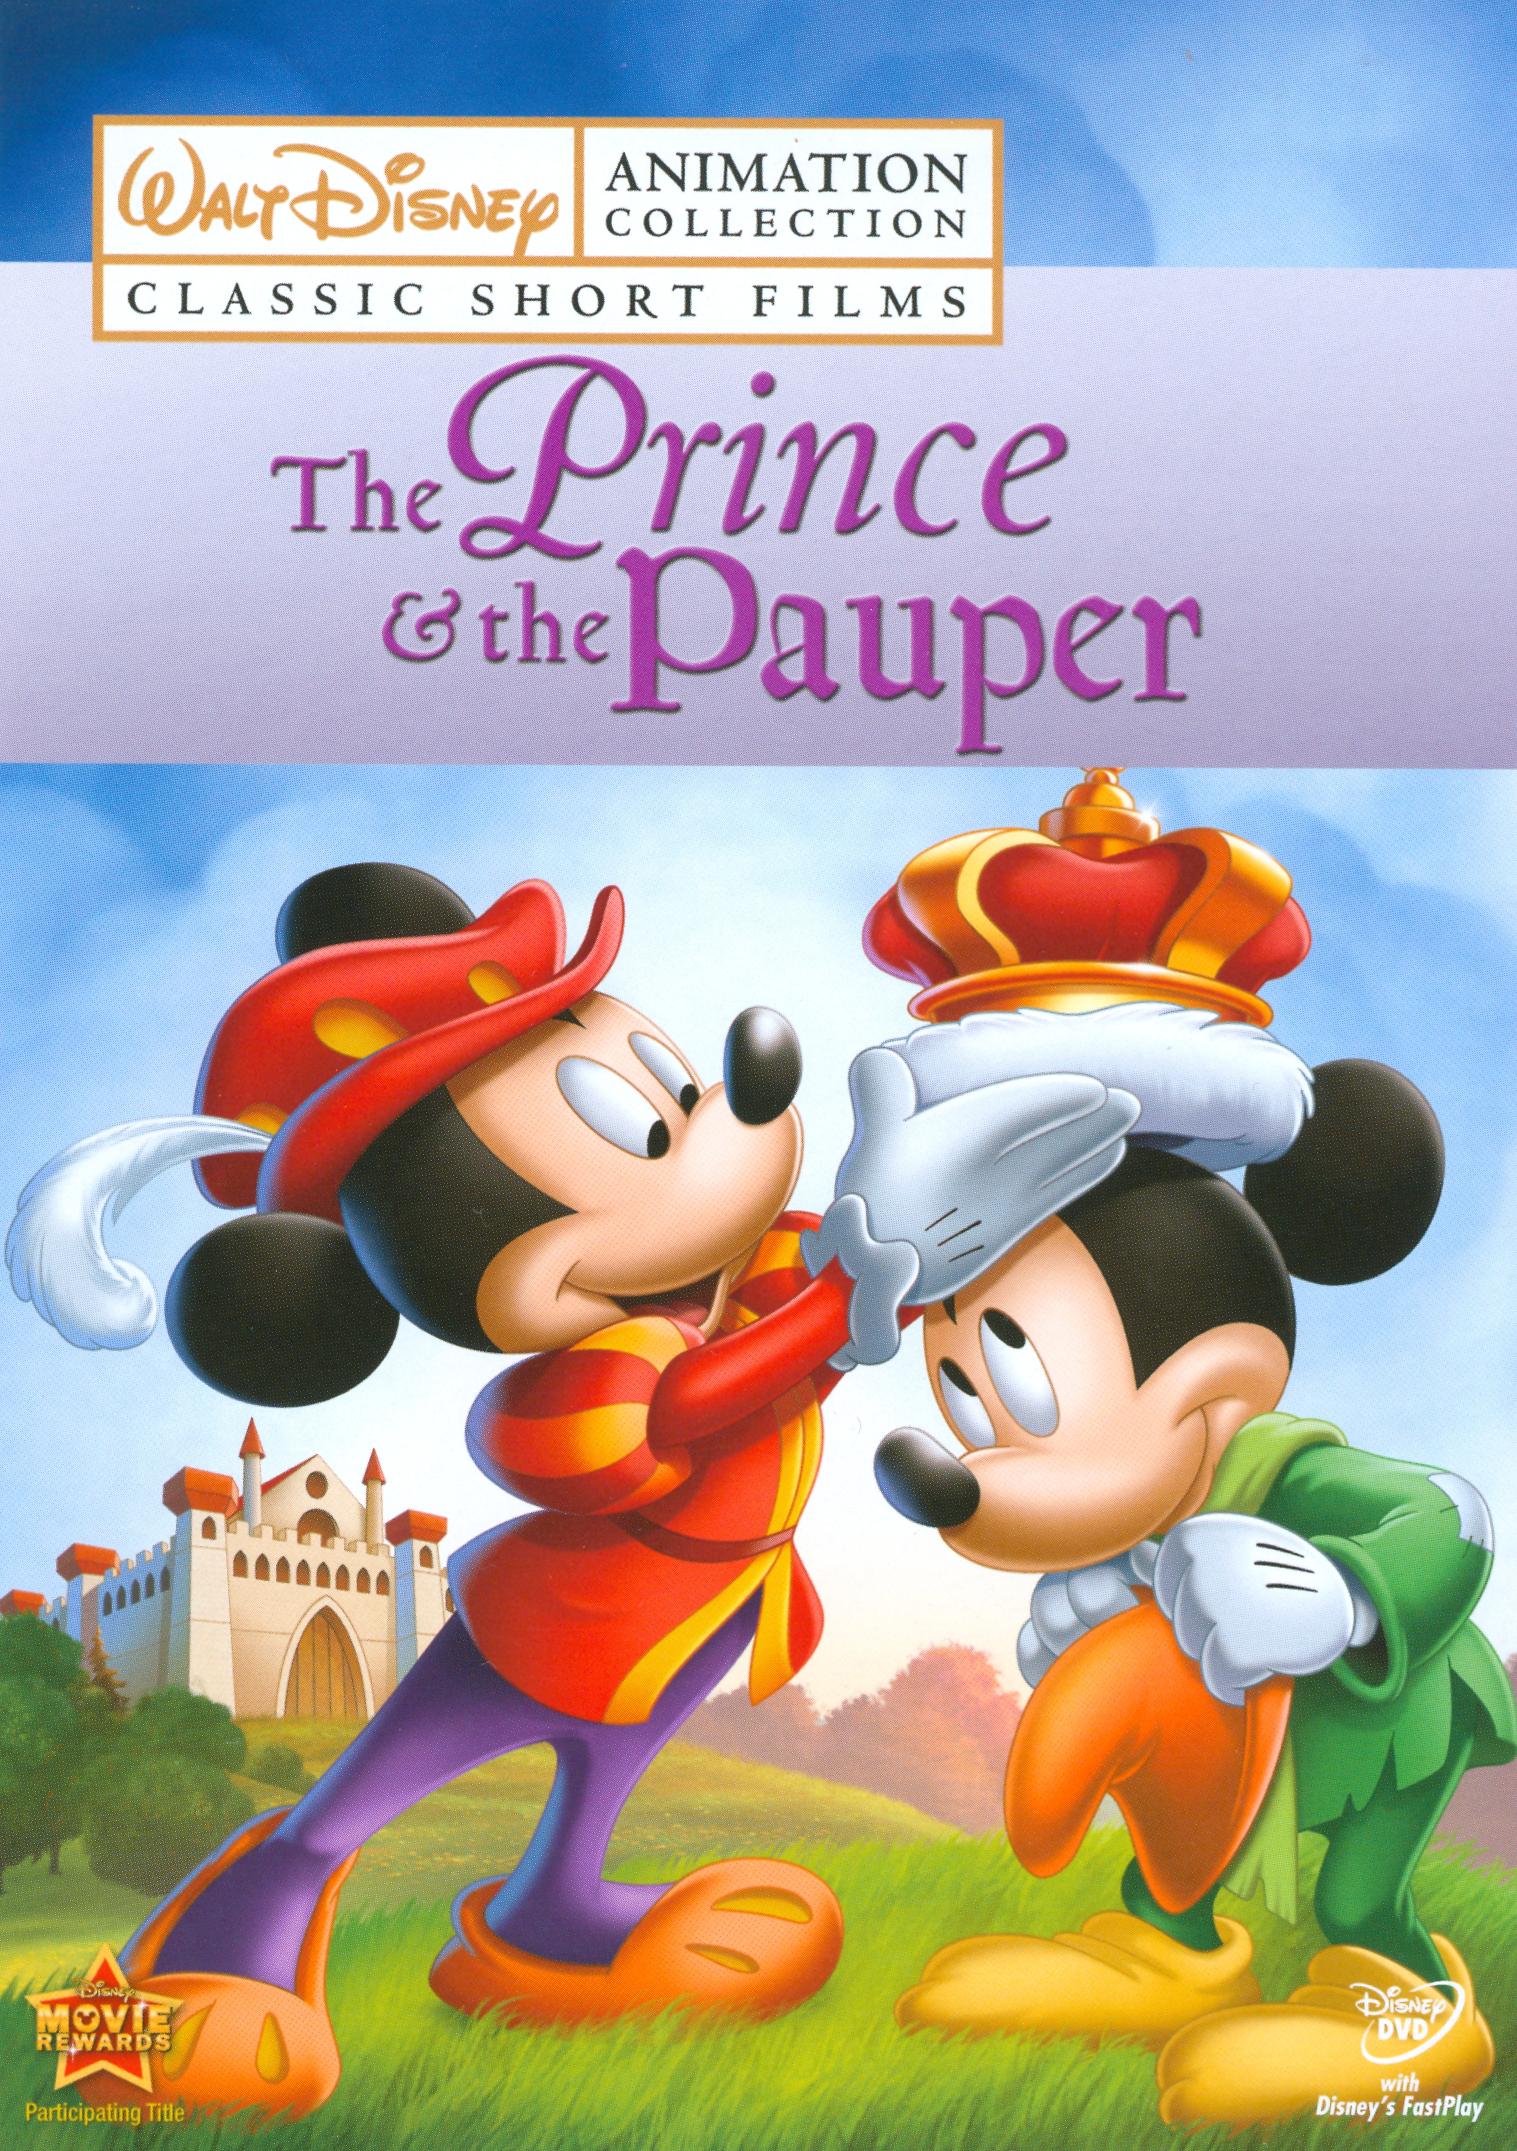 Walt Disney Animation Collection: Classic Short Films, Vol. 3 The Prince &  the Pauper - Best Buy